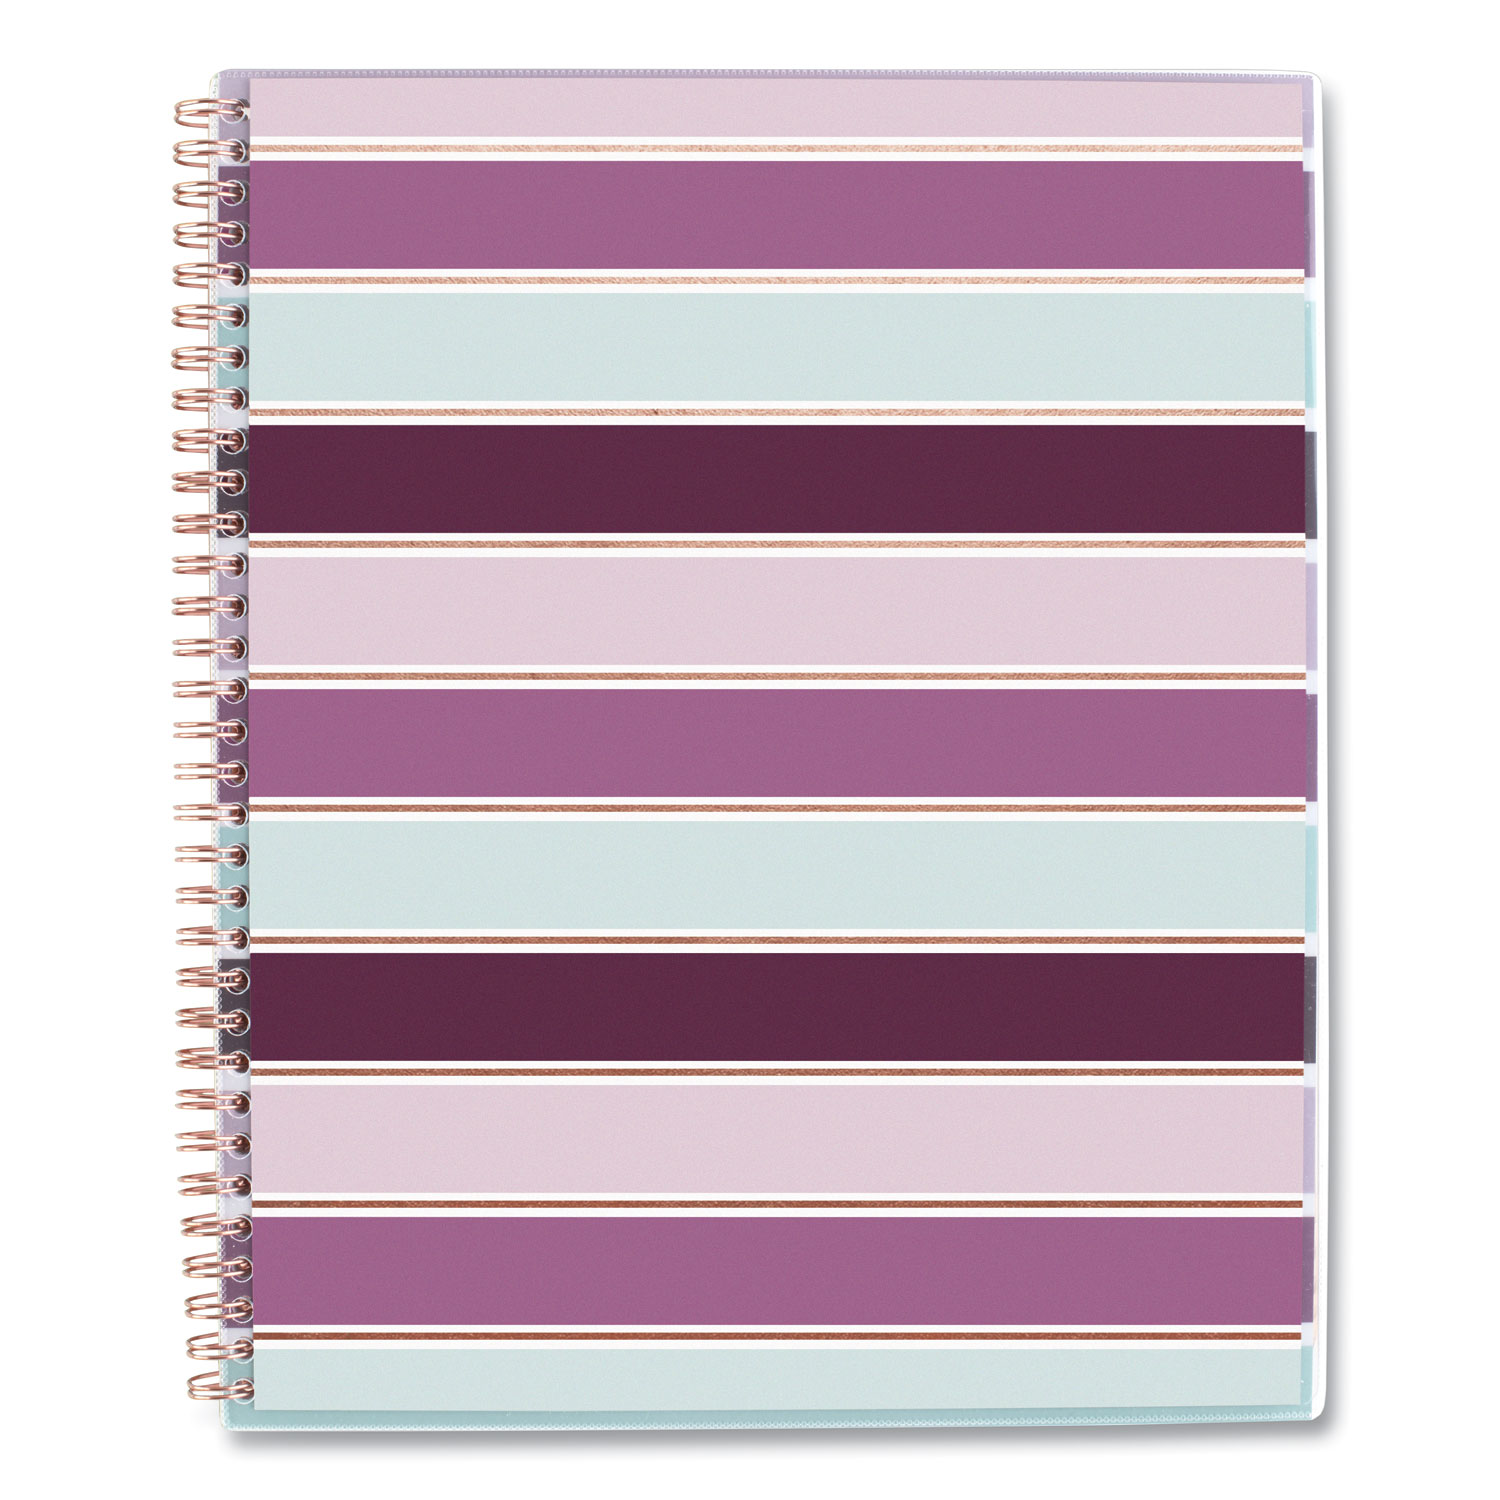 Cambridge® Ribbon Weekly/Monthly Planner, 11 x 8.5, Burgundy/Pink/Blue/White Striped, 2021